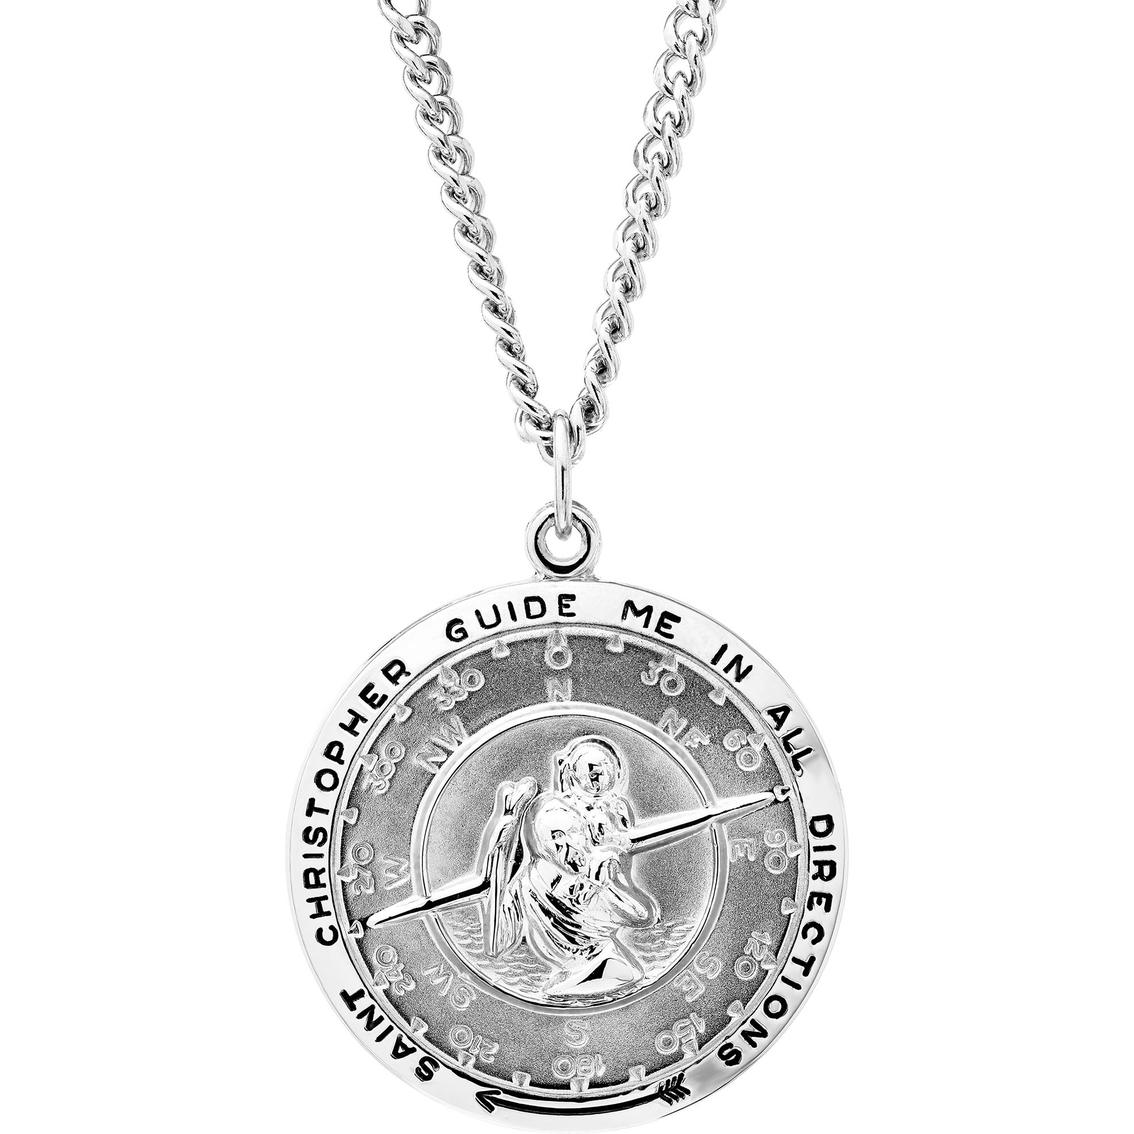 Sterling Silver Saint Christopher Medal 0.71 in x 0.43 in 